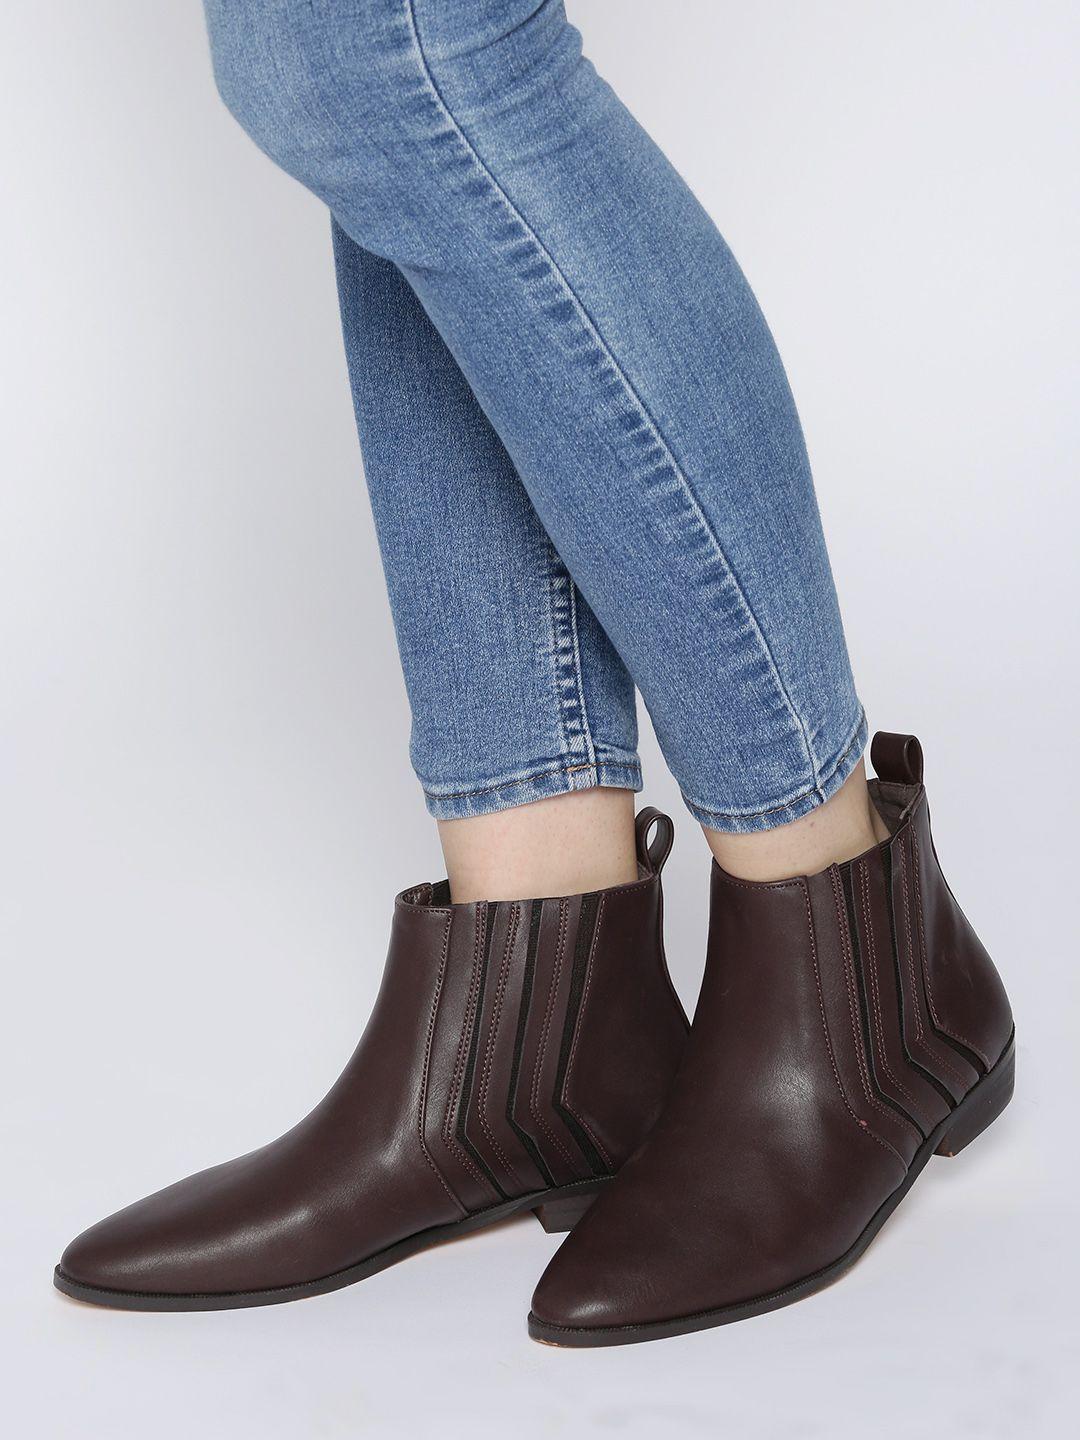 the roadster lifestyle co women burgundy solid mid-top chelsea boots